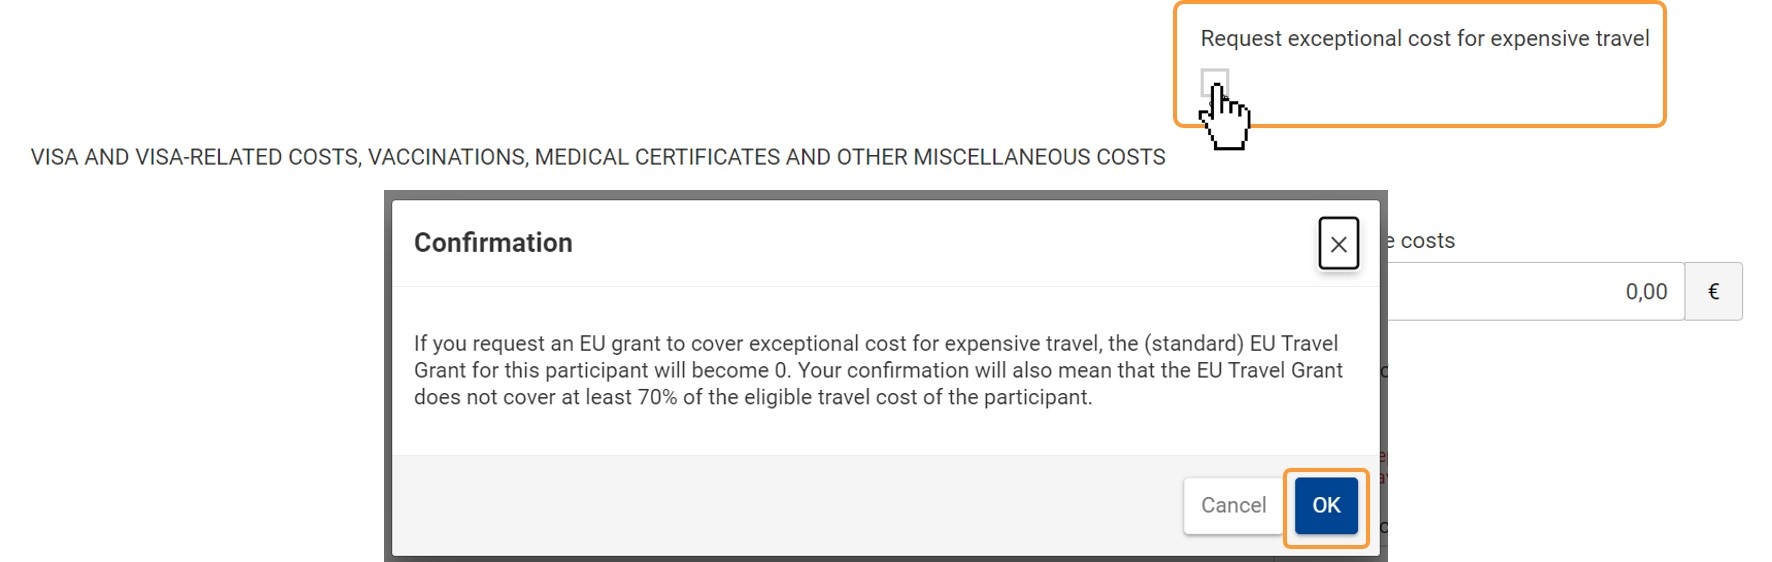 Request Exceptional costs for expensive travel flag